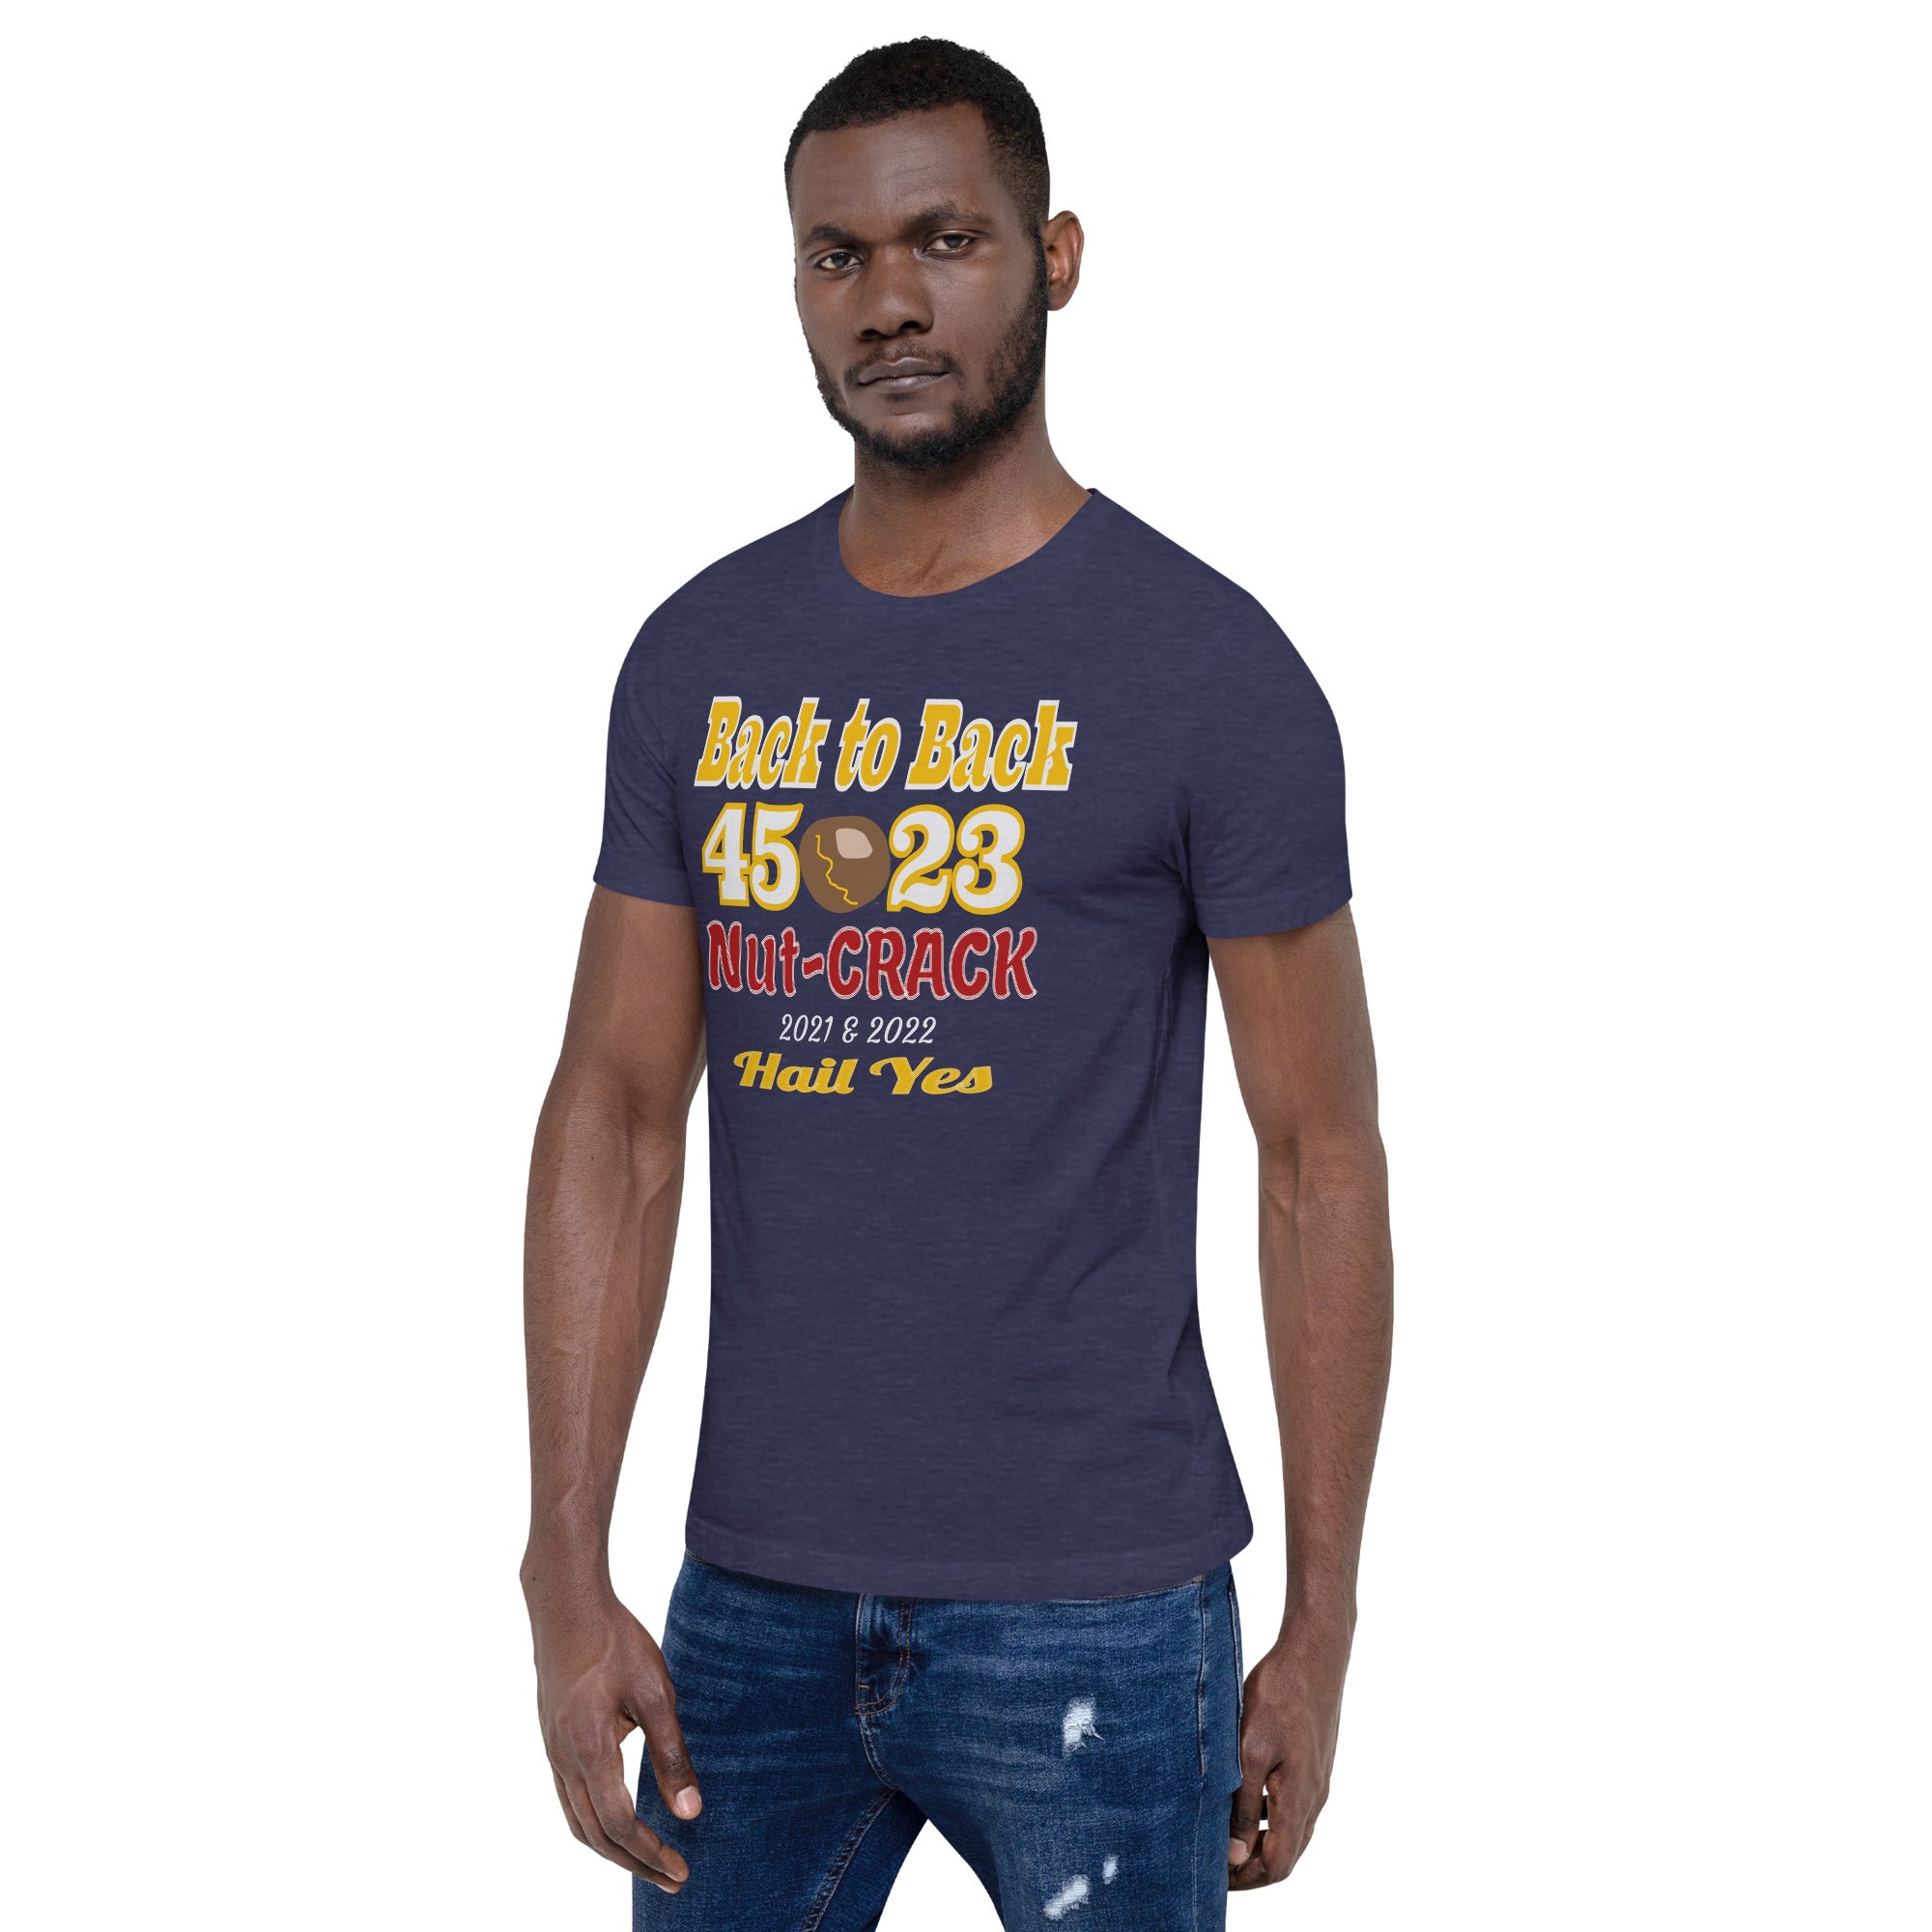 Michigan Football Fans Beat Ohio State Score T-Shirt Featuring Back to Back Nut Crack Design